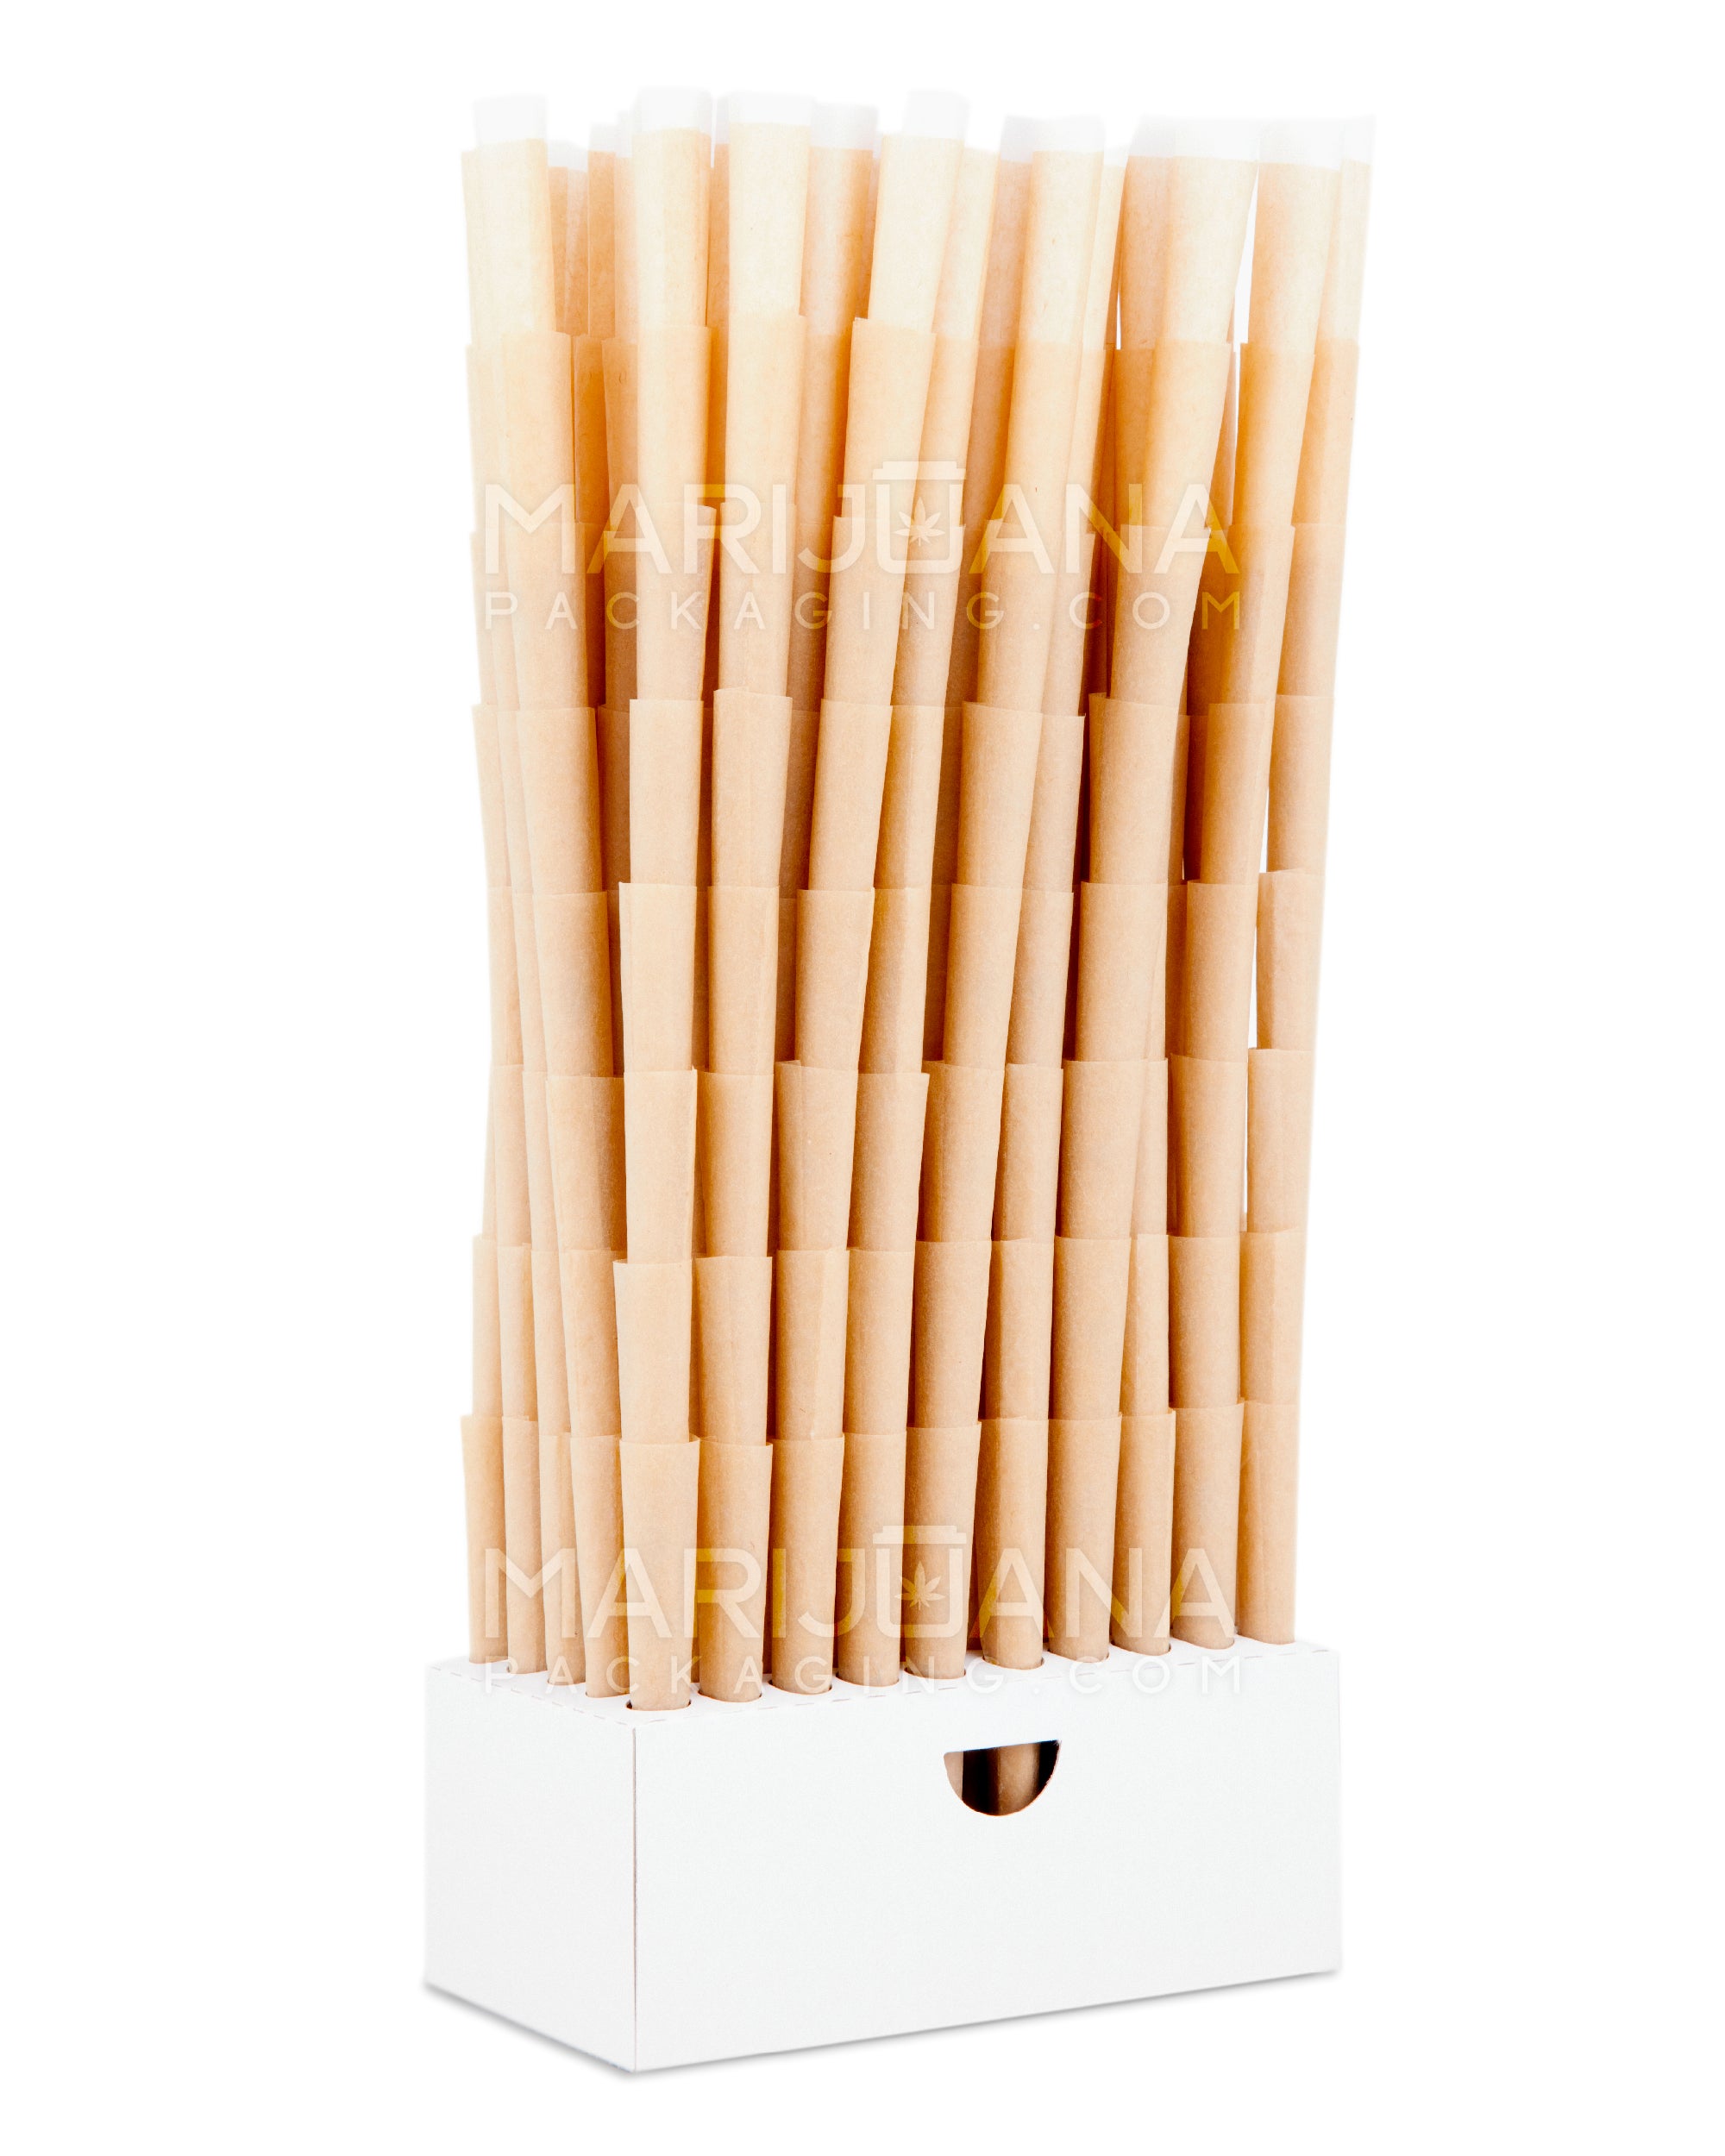 POP CONES | 1 1/4 Size Unbleached Pre-Rolled Cones | 84mm - Strawberry Jam - 400 Count - 3